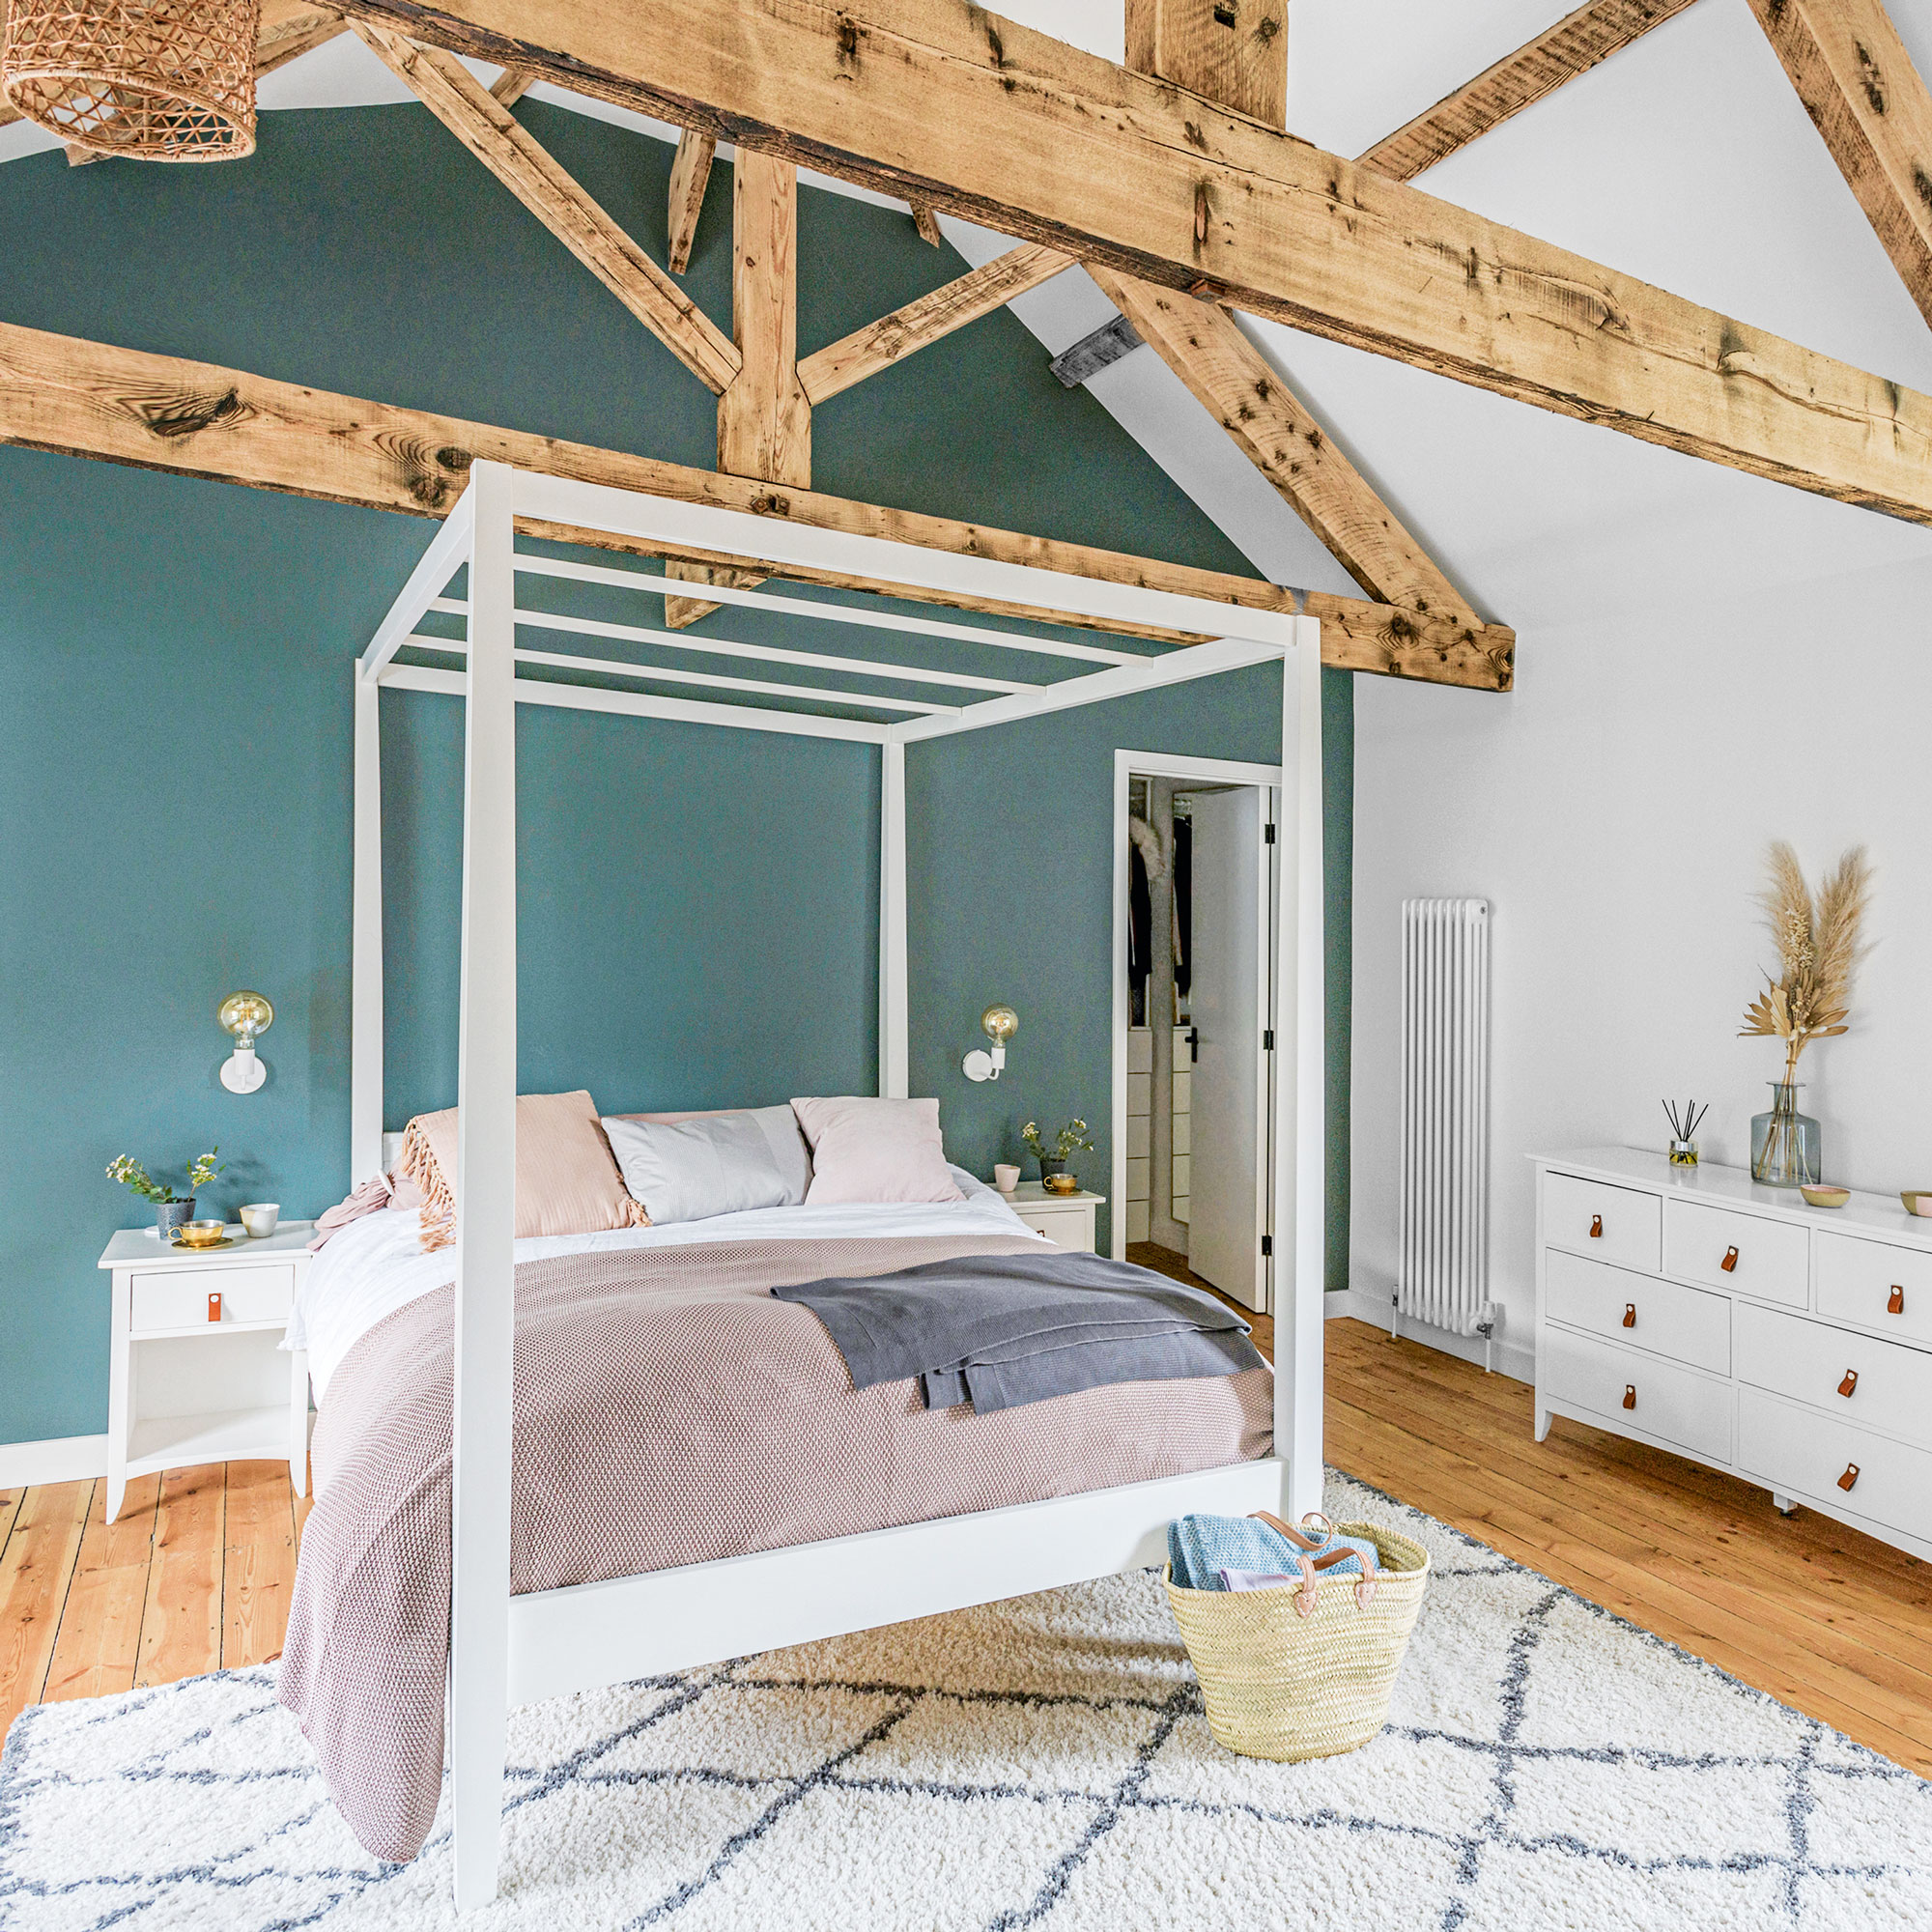 blue bedroom with white four-poster bed, wooden floor, rug and wooden beams